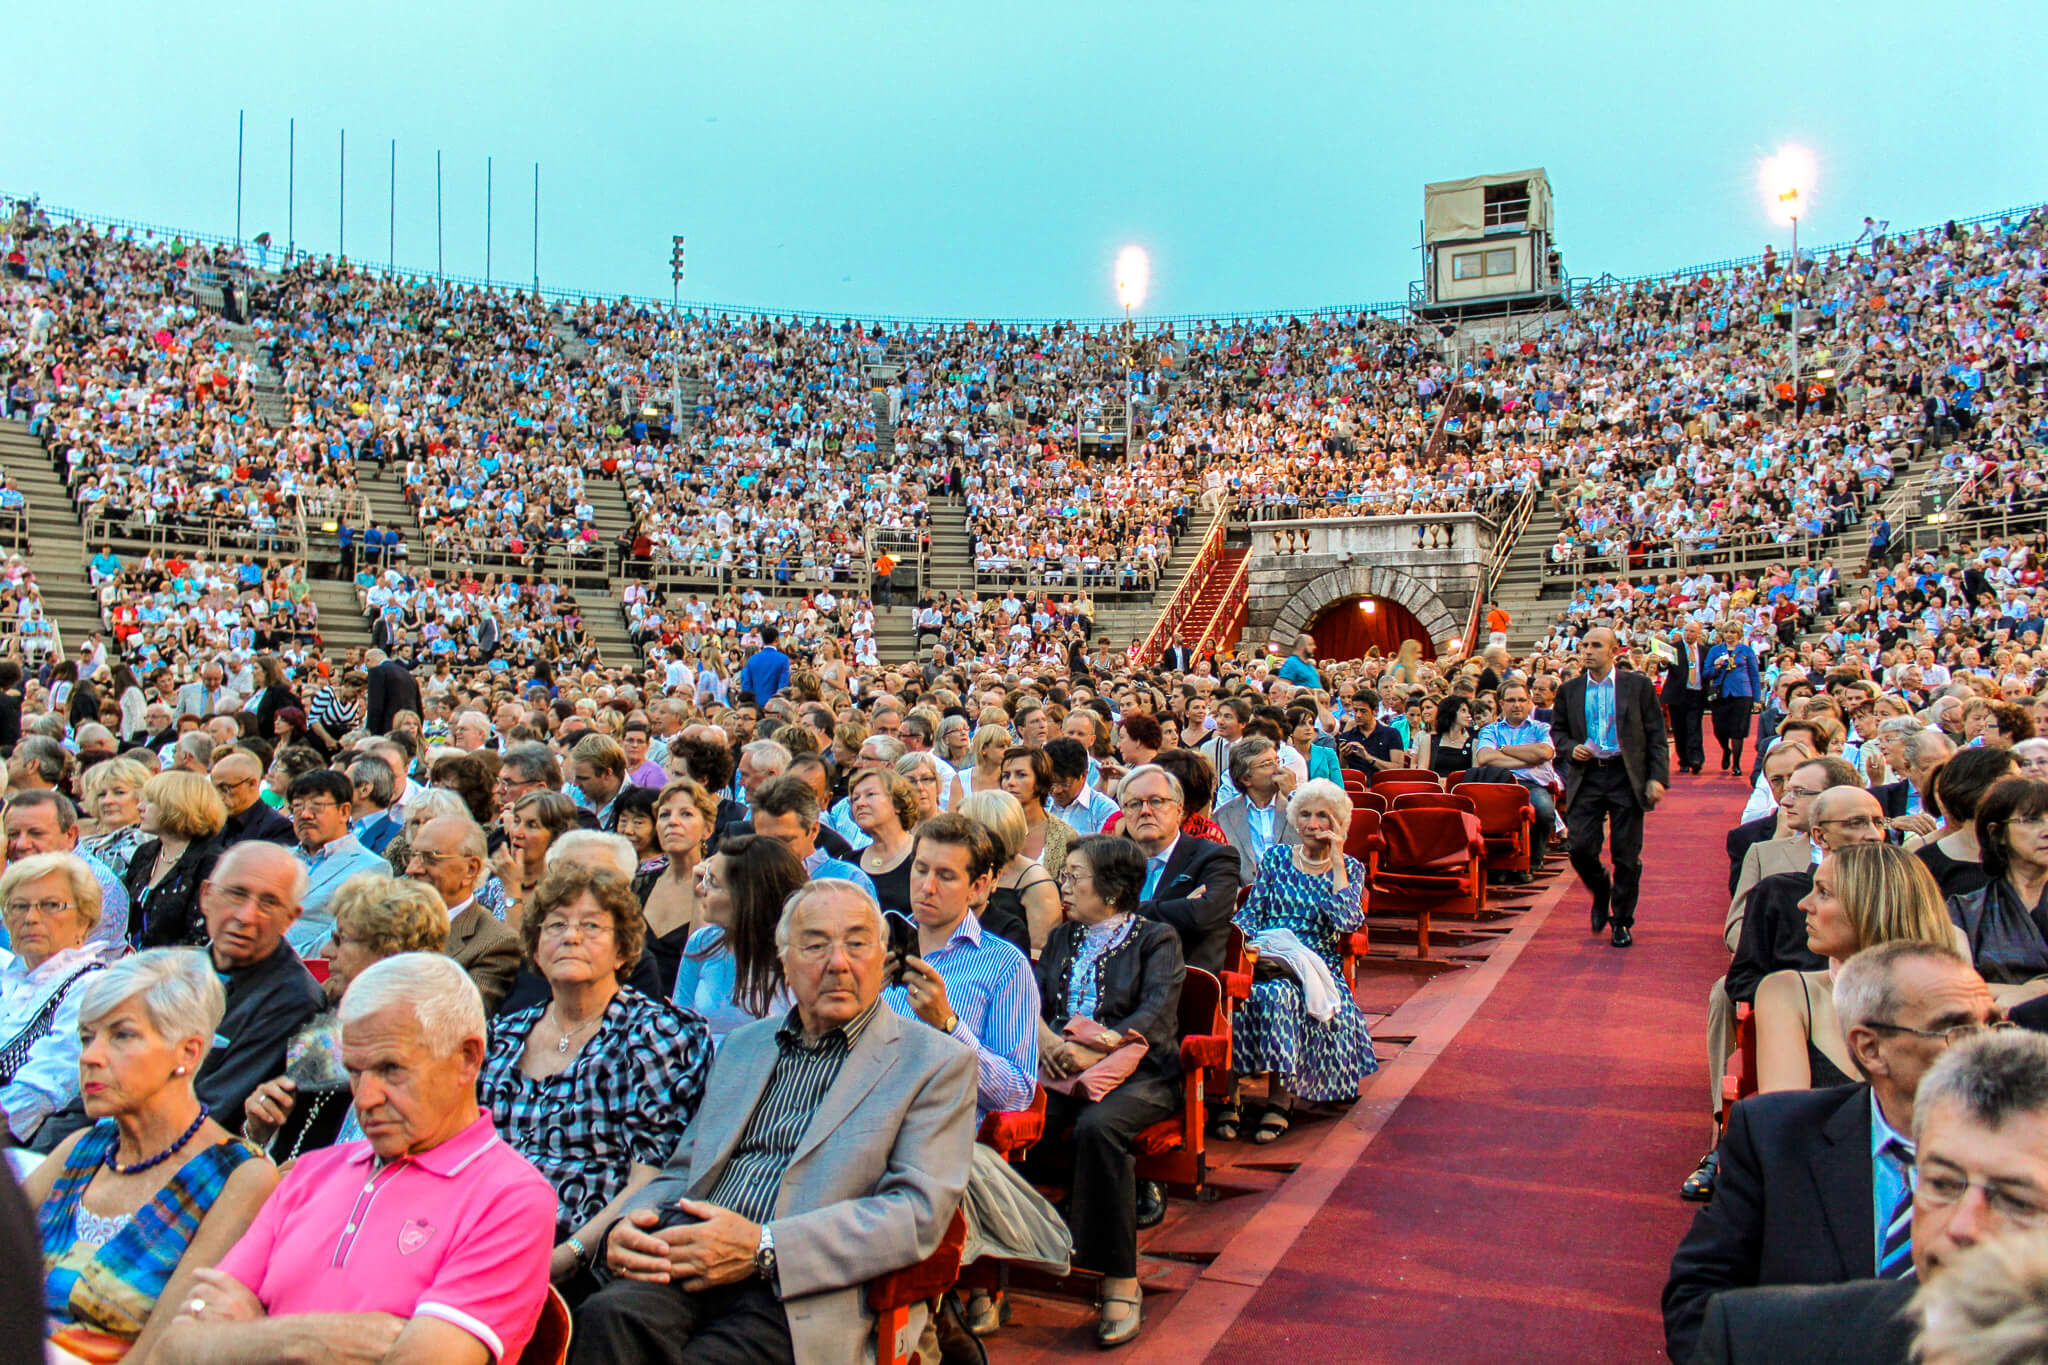 Audience in the Verona Arena for an opera performance